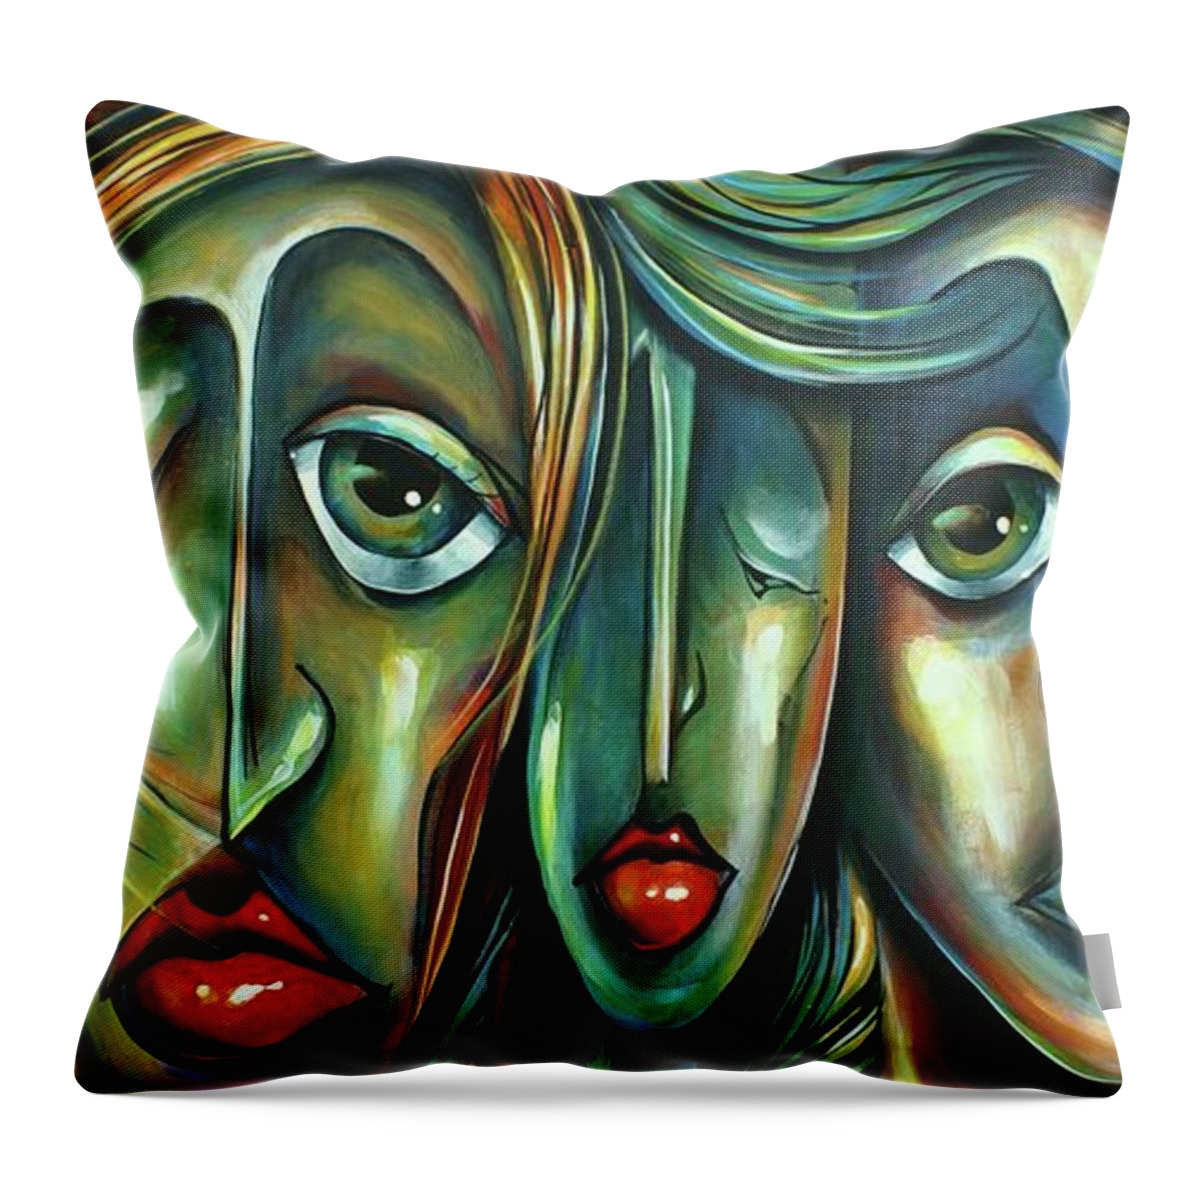 Urban Expression Throw Pillow featuring the painting Urban Doctrine by Michael Lang